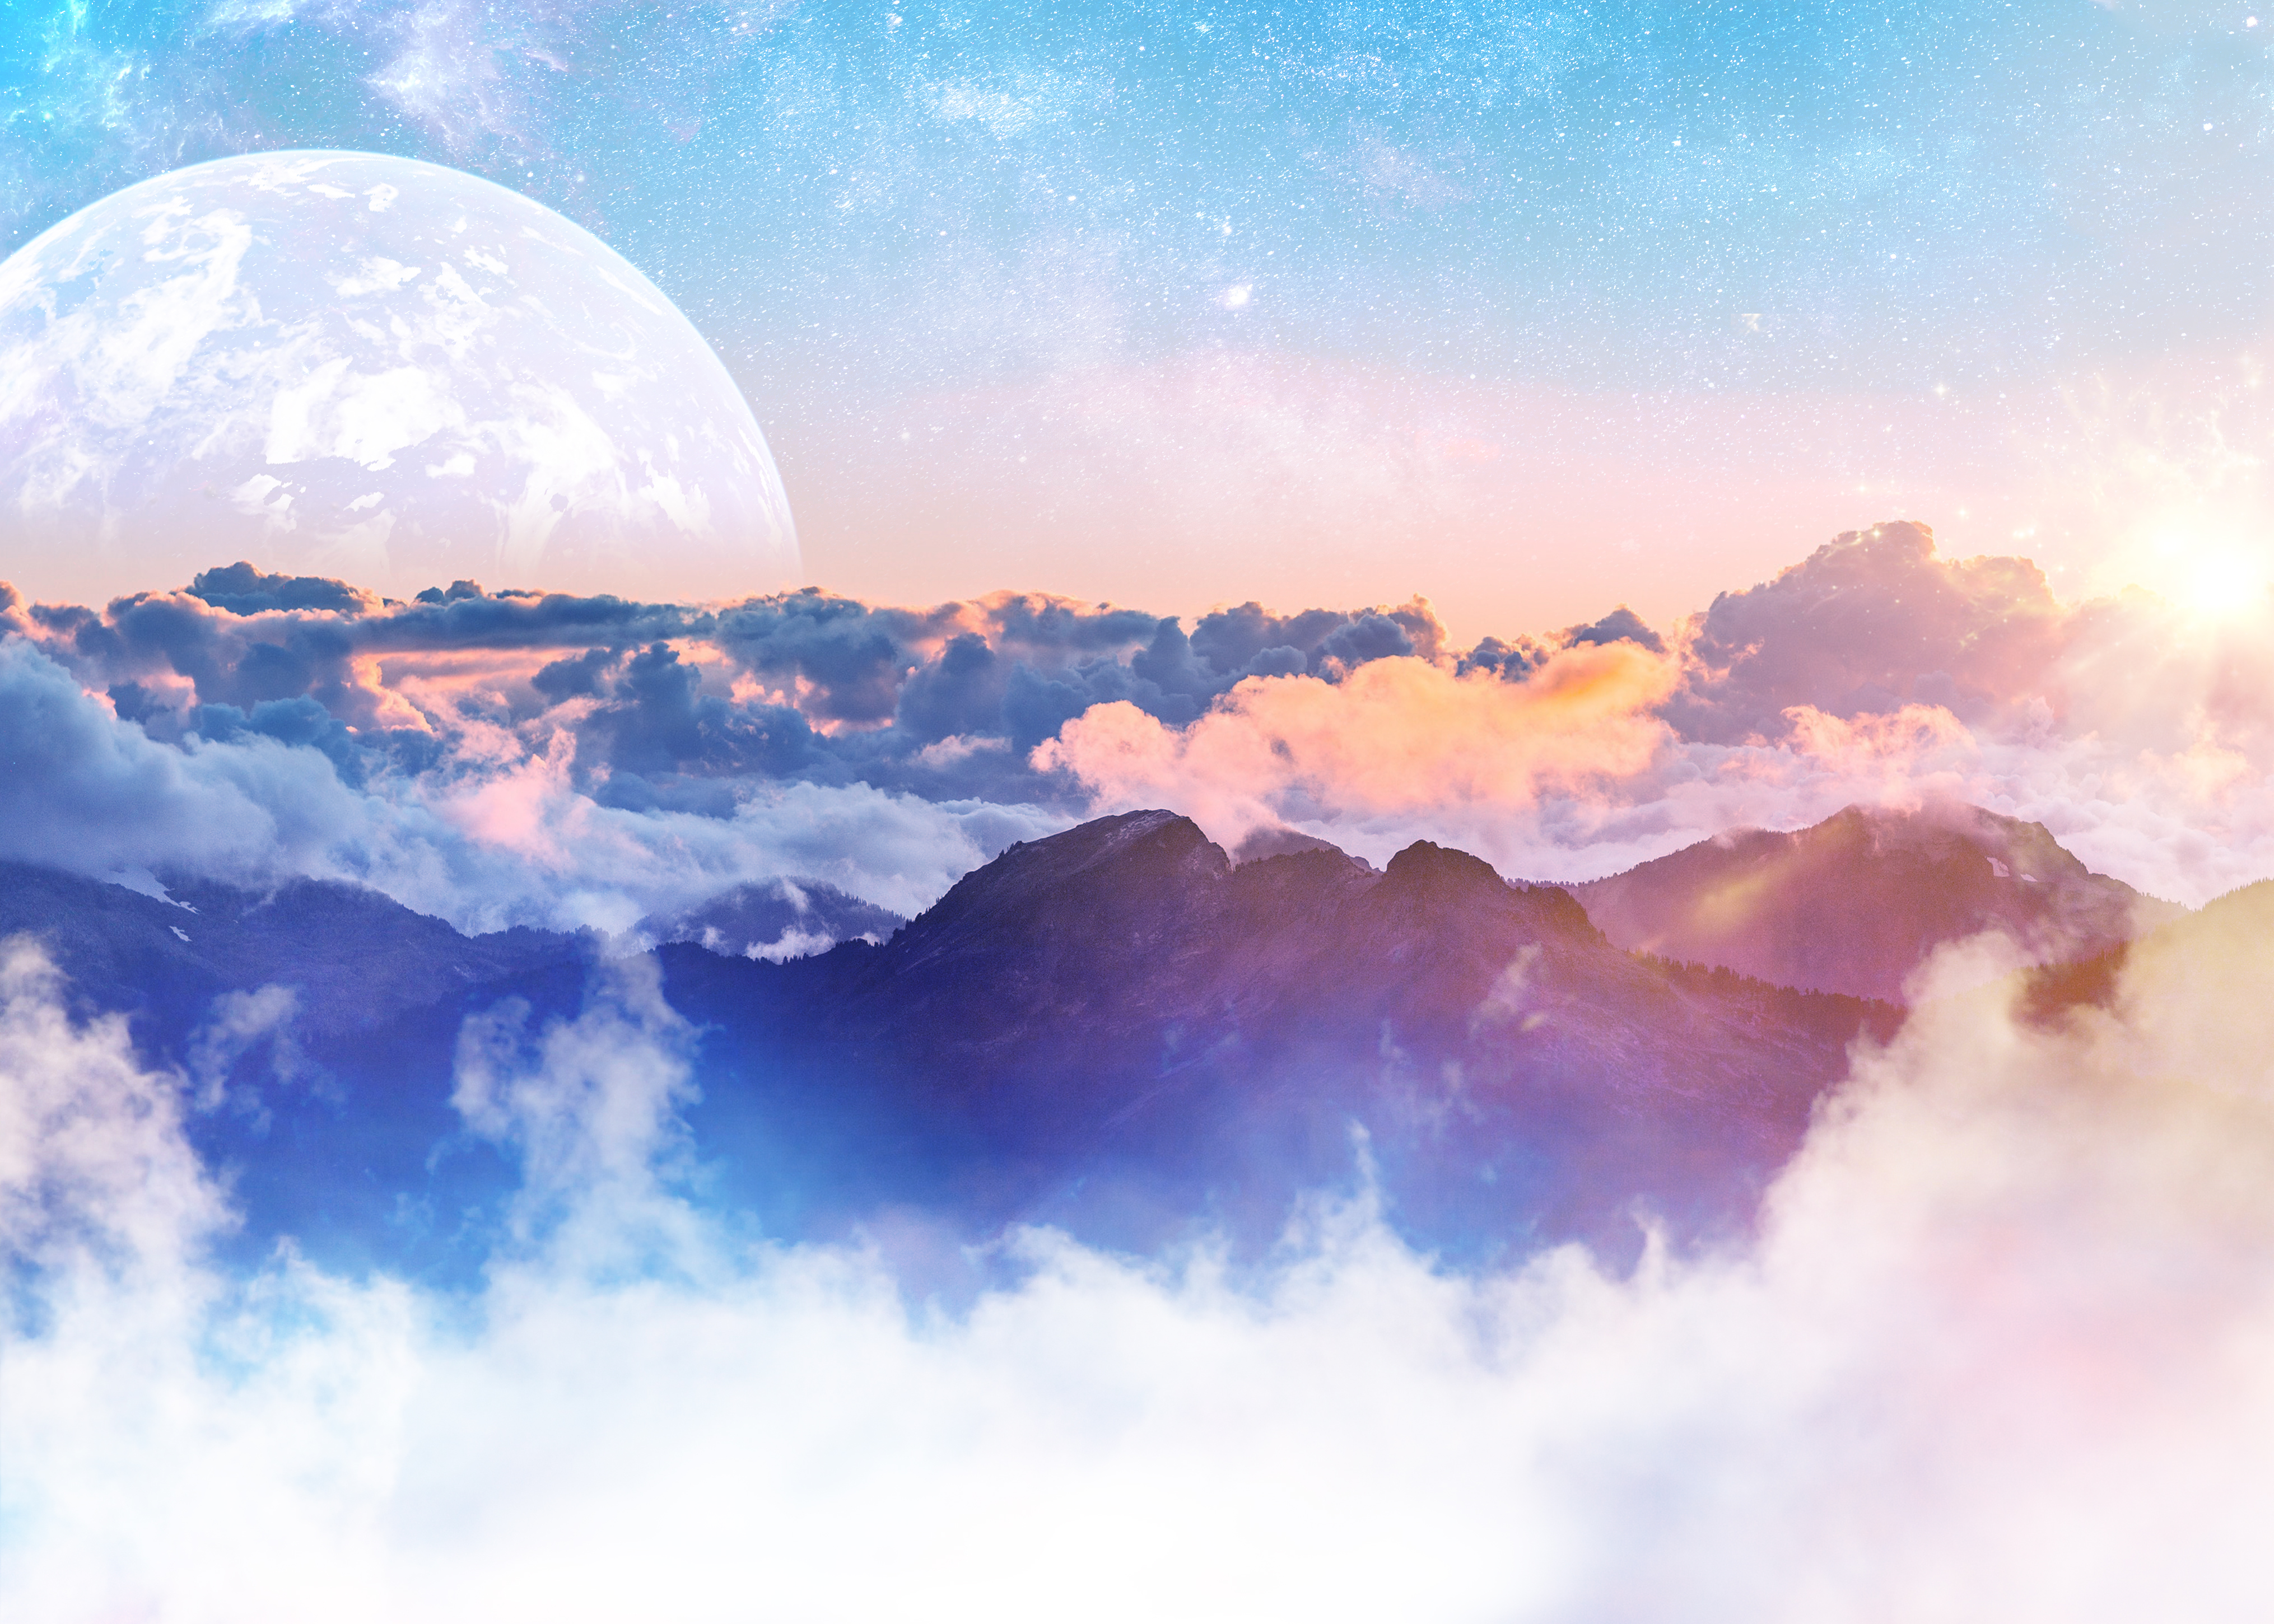 133822 download wallpaper landscape, nature, mountains, clouds, moon, overview, review, height screensavers and pictures for free